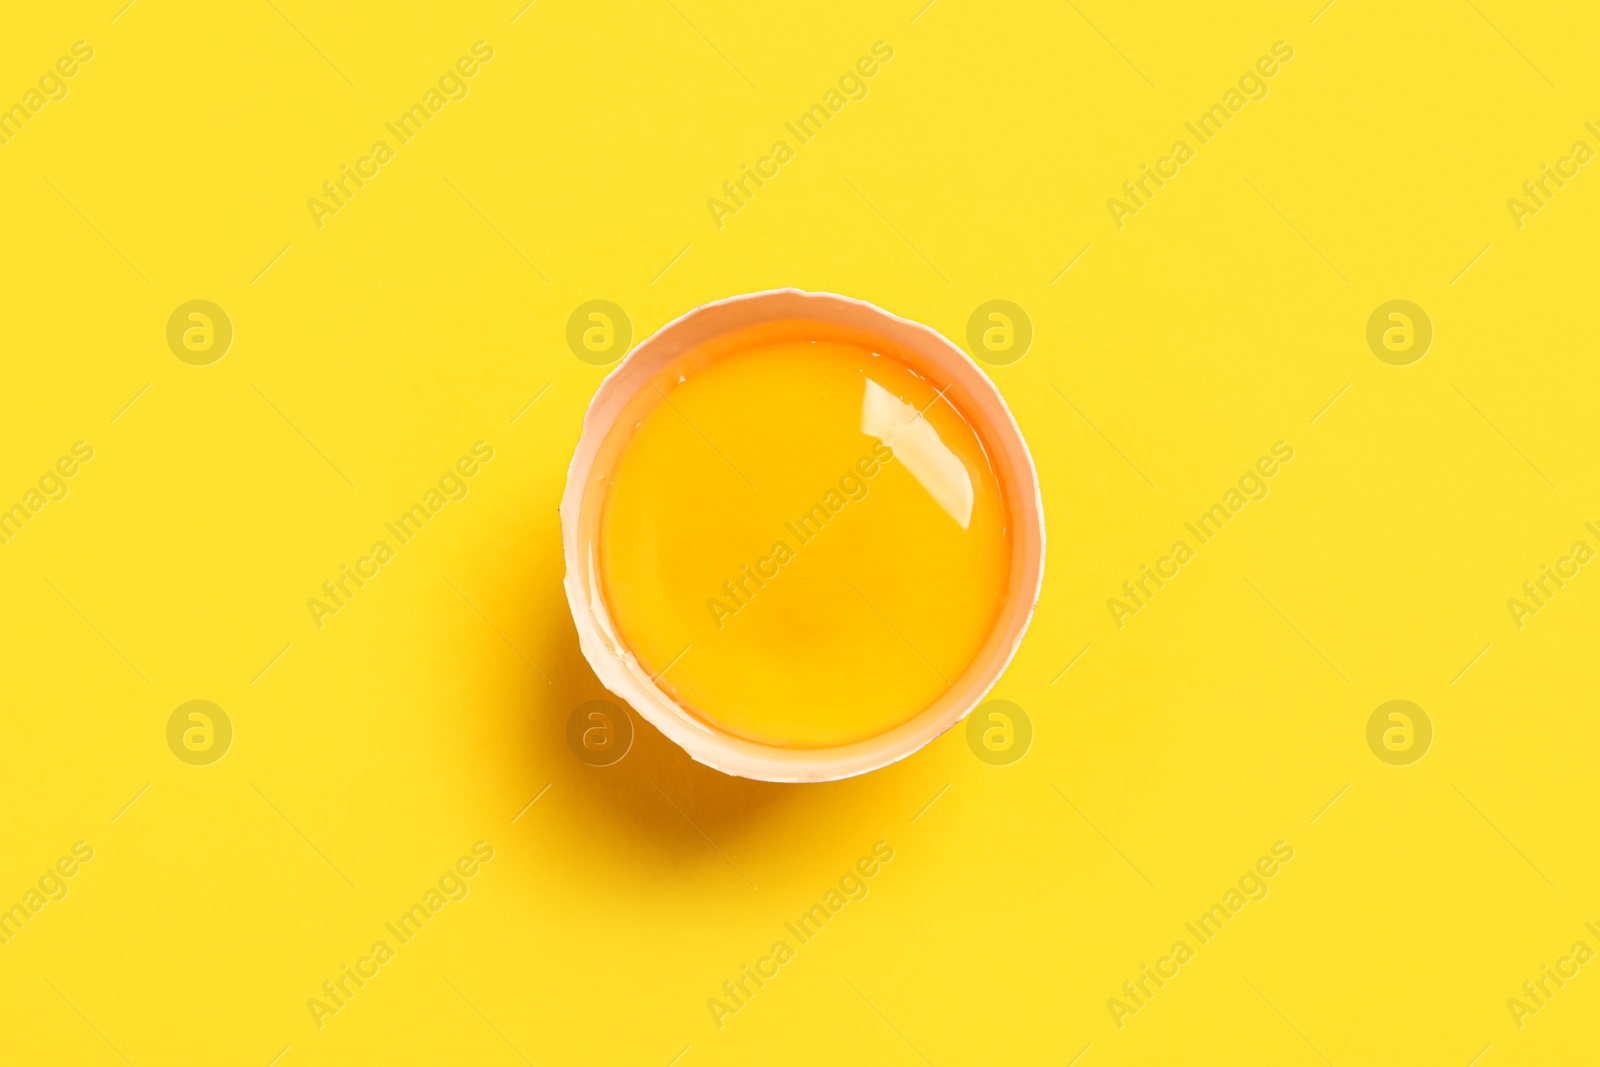 Photo of Cracked eggshell with raw yolk on yellow background, top view